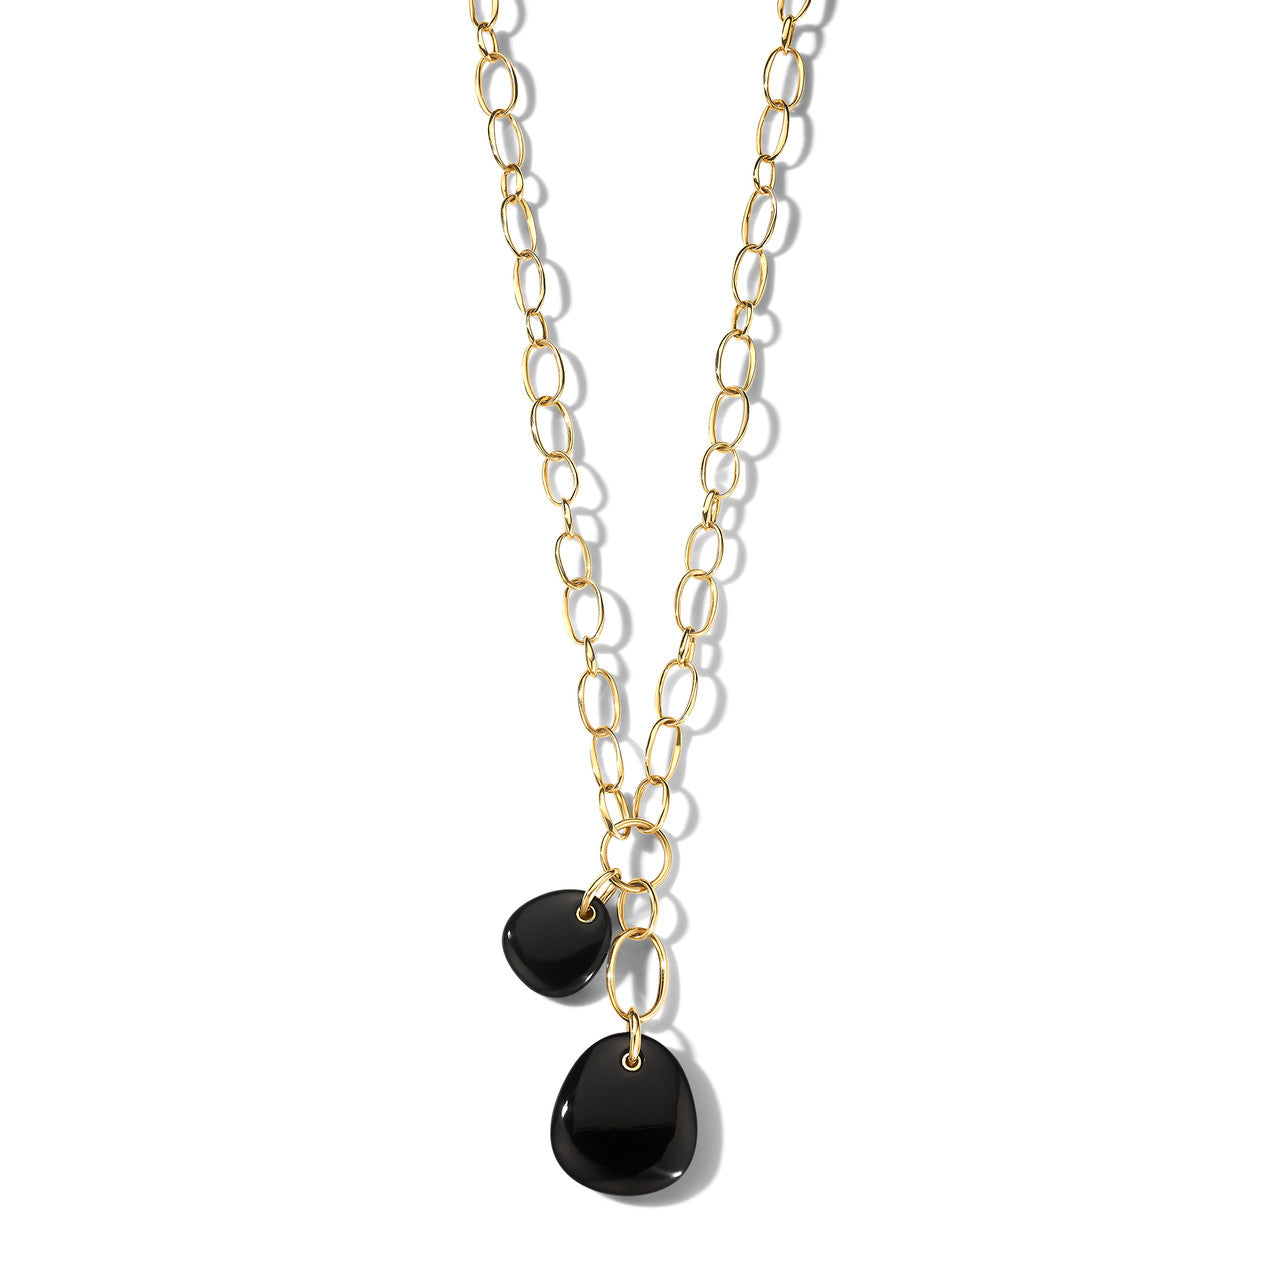 Rock Candy Two-Pebble Pendant Necklace